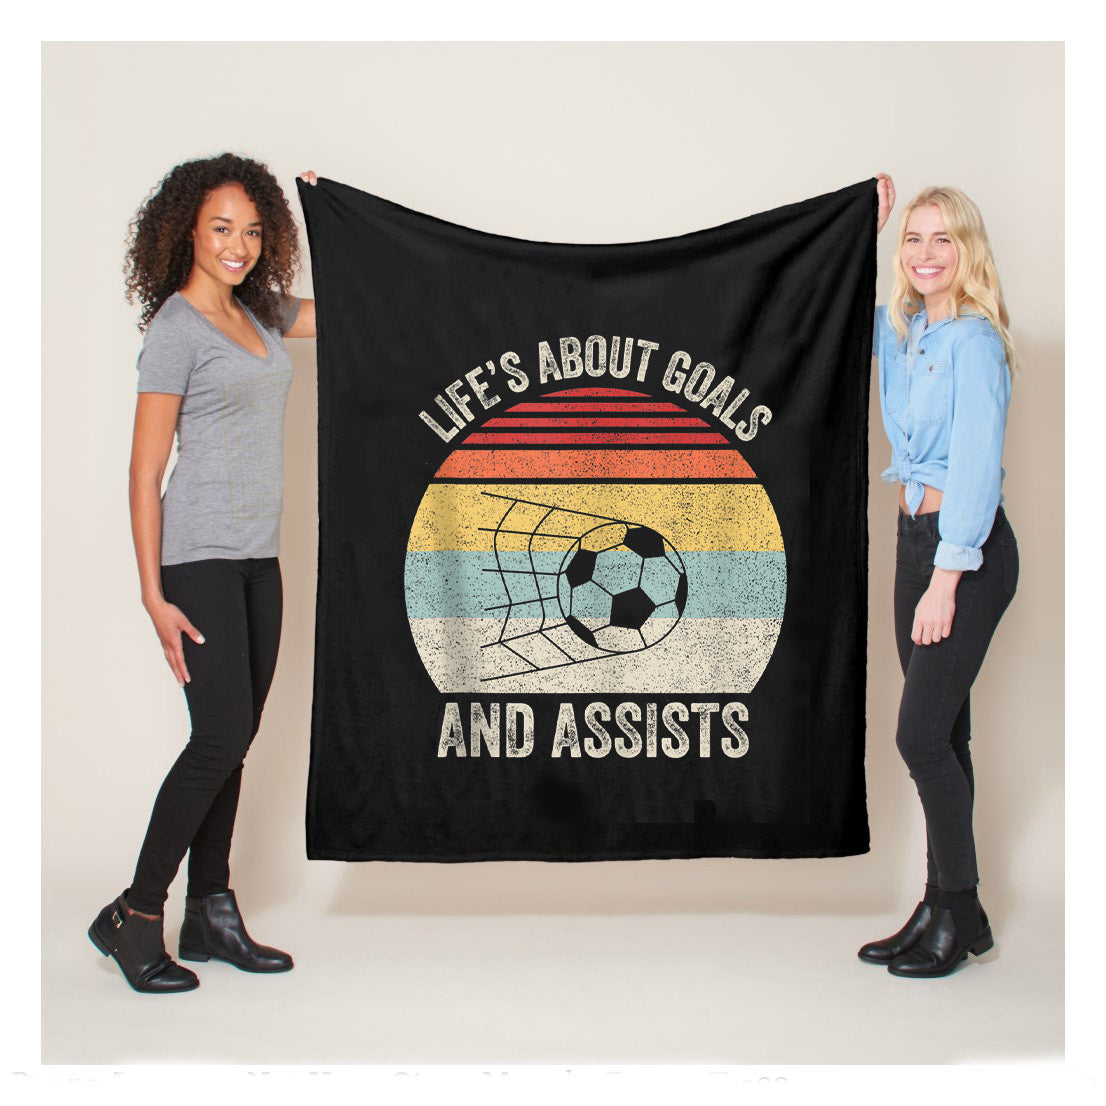 Soccer Players Lifes About Goals And Assists Love Soccer Fleece Blanket,  Soccer Outdoor Blankets, Soccer Gifts For Coach And Soccer Players, Birthday Gift For Soccer Player